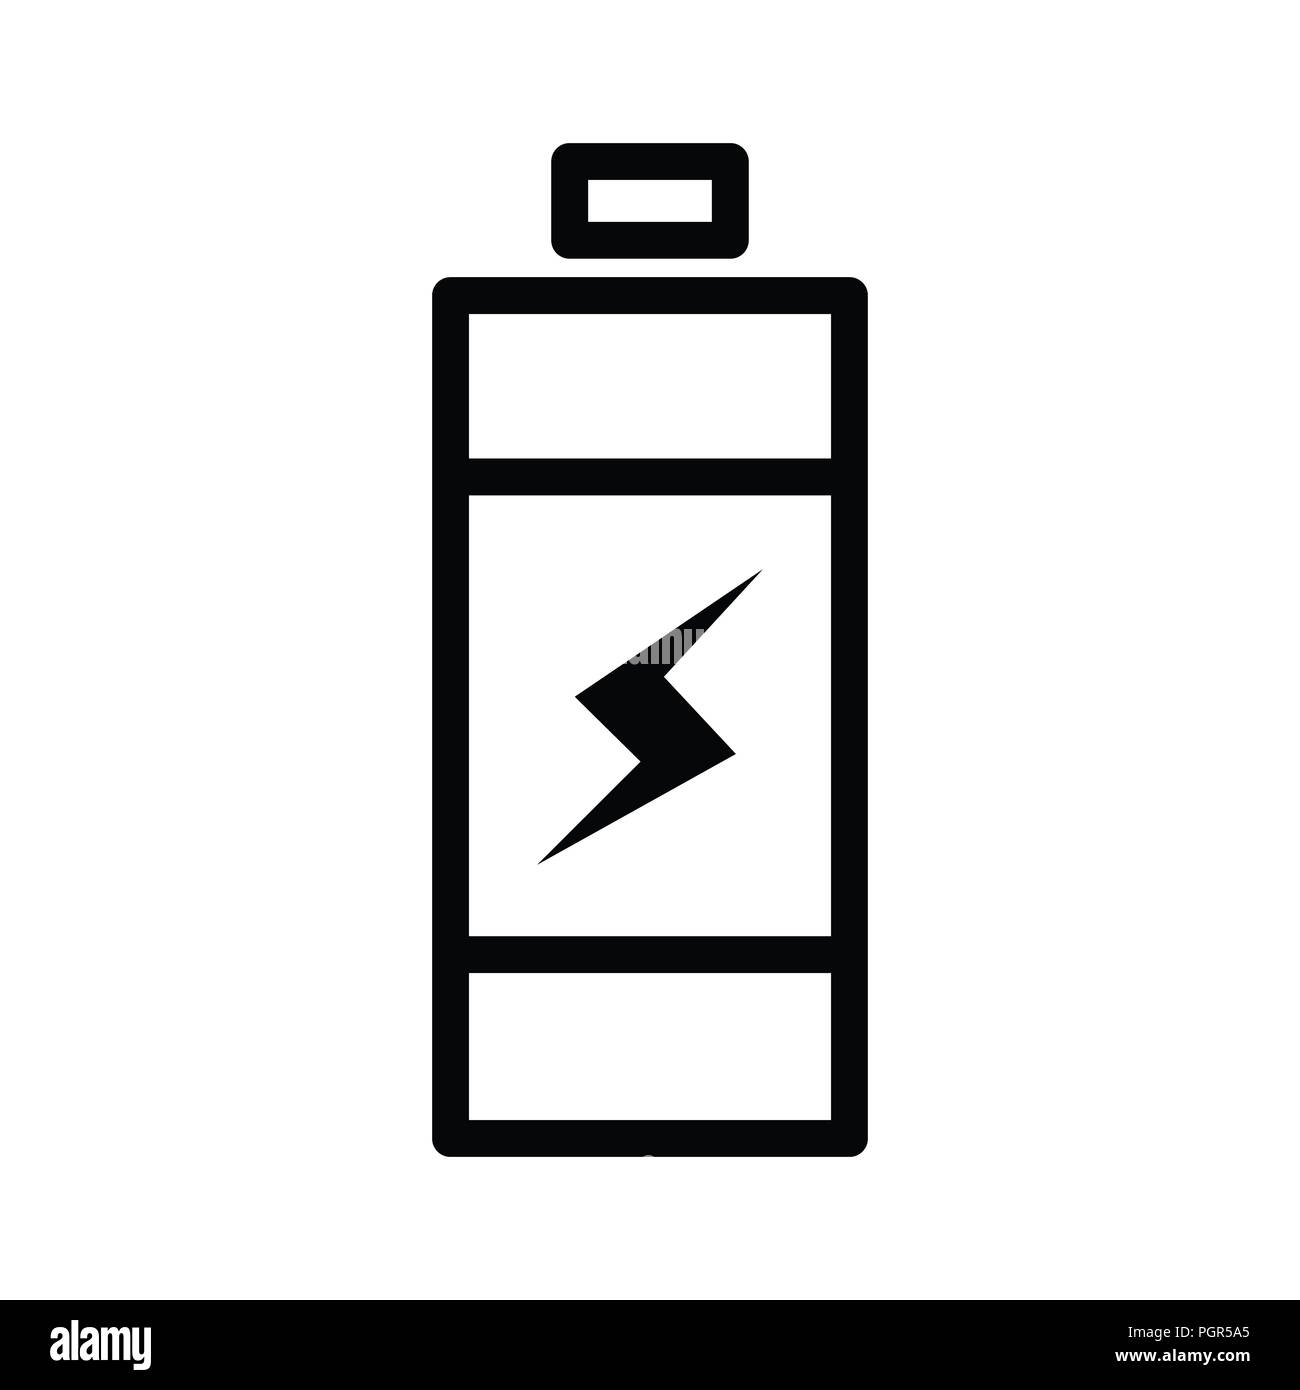 Battery icon Single outline line style with electric vector illustration Stock Photo